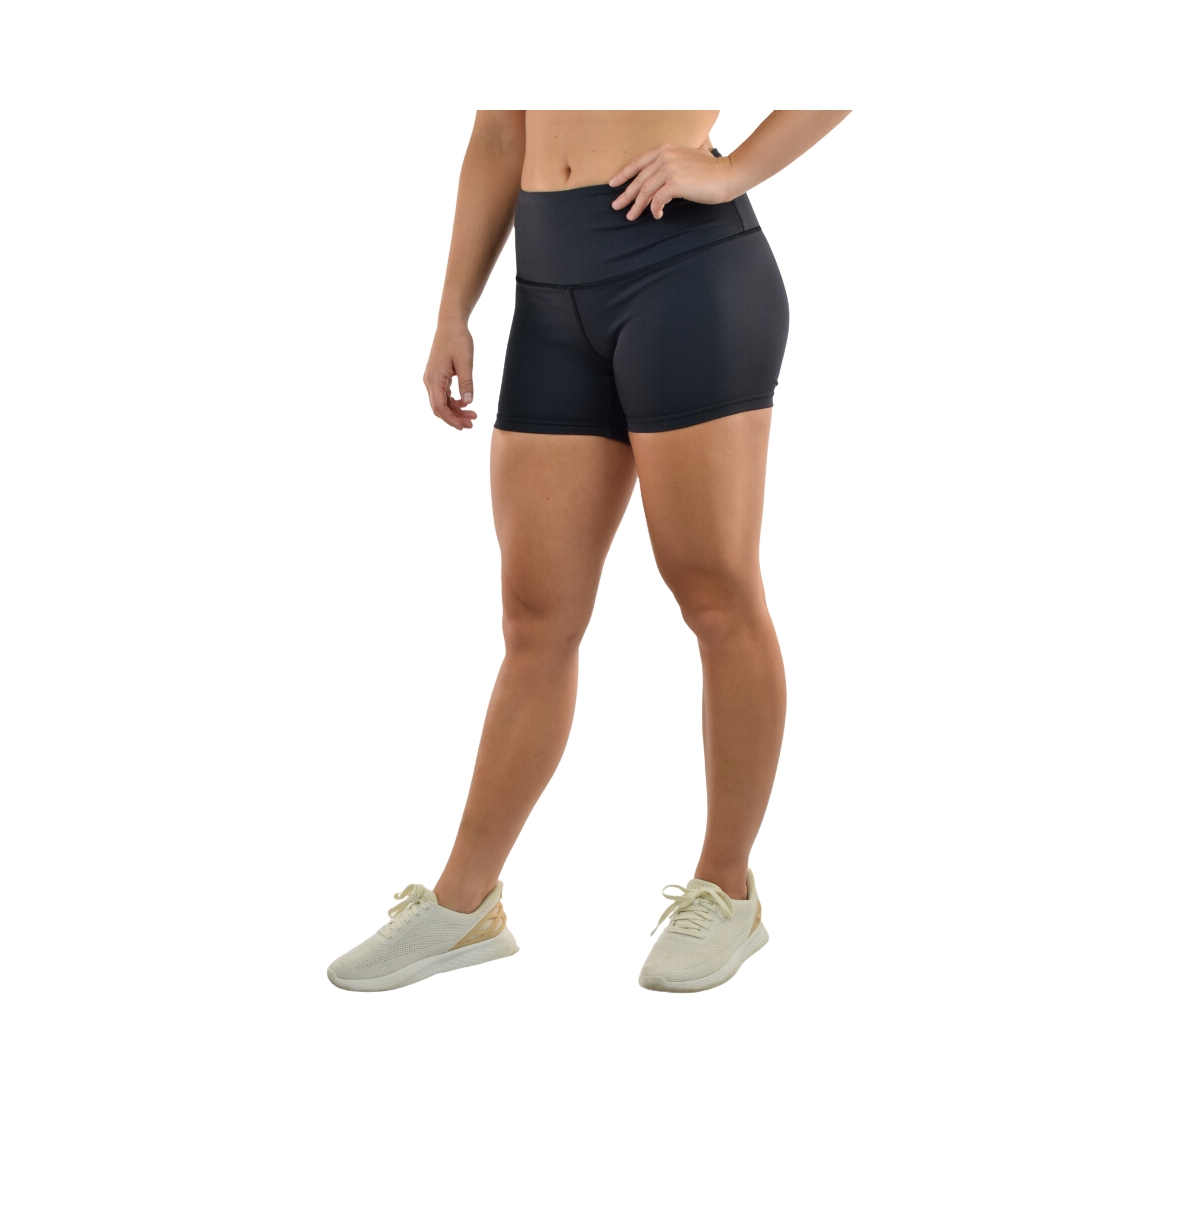 Women's Leakproof Activewear Mid-Rise Shorts For Bladder Leaks and Periods - Black